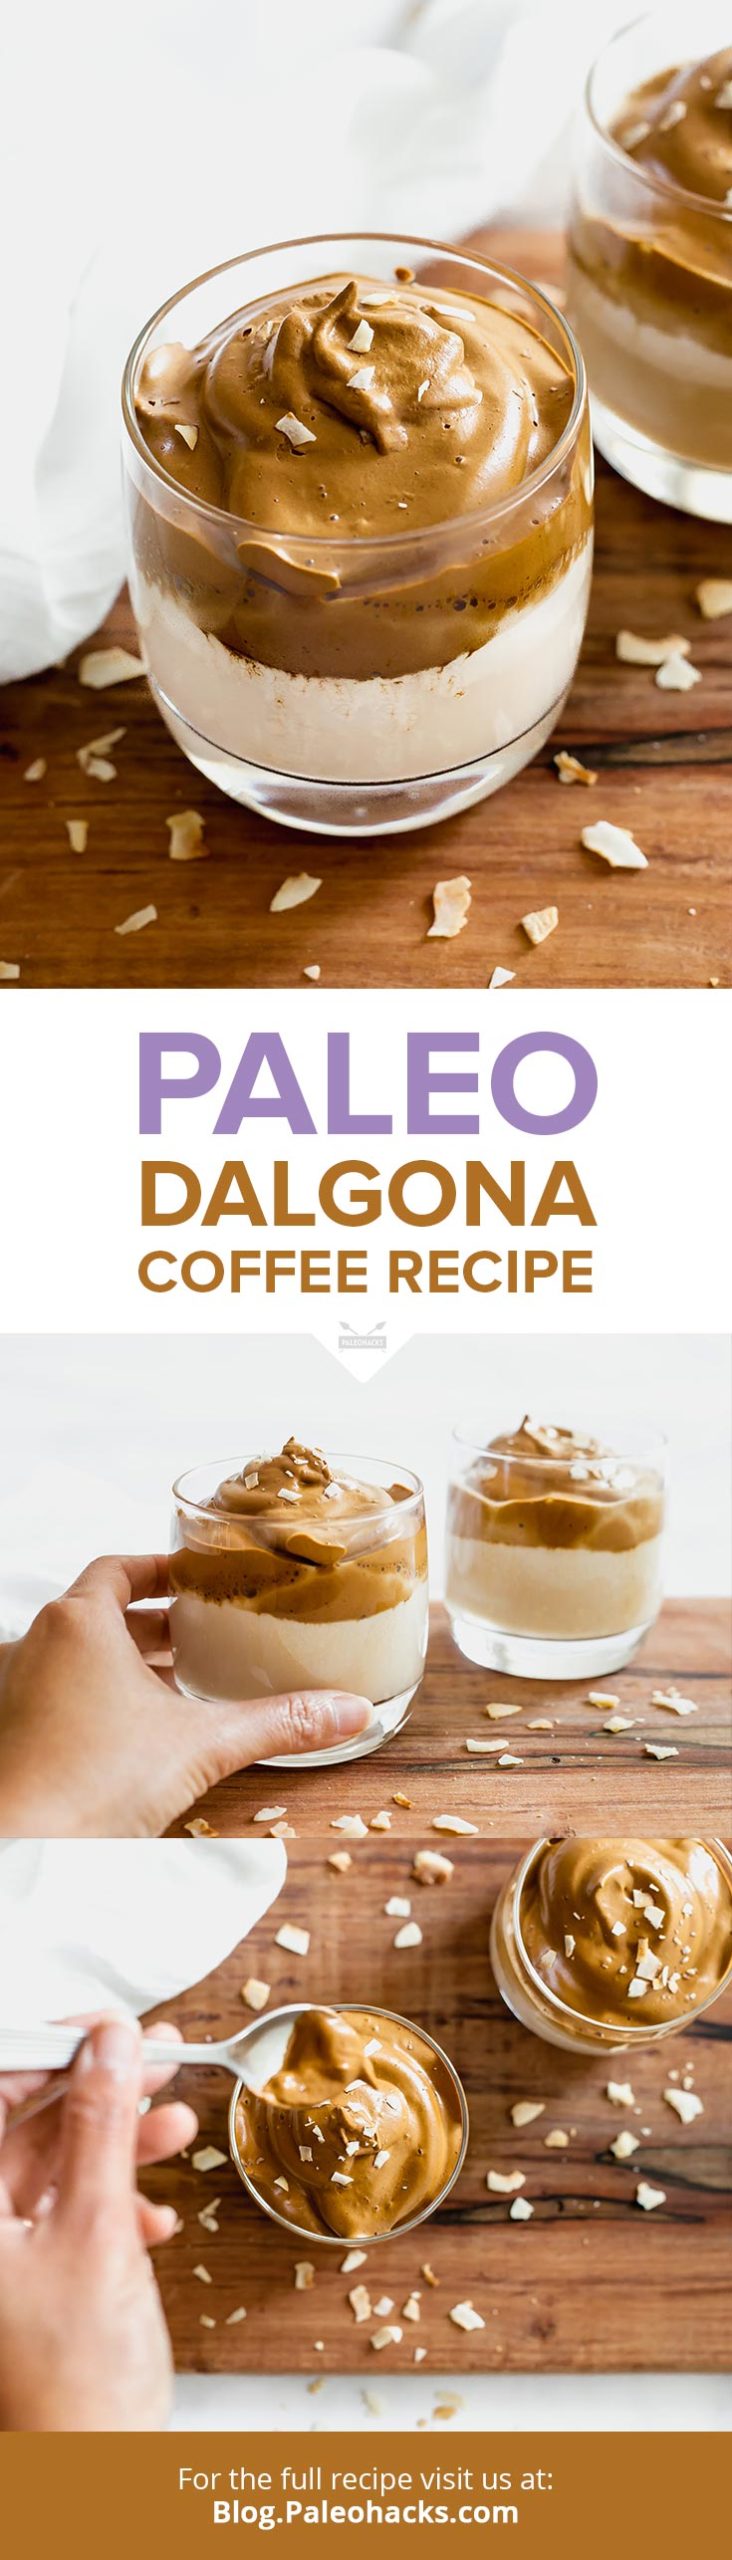 Whip up this Paleo Dalgona coffee in a couple of minutes with only 3 ingredients and almond milk or your favorite dairy alternative.